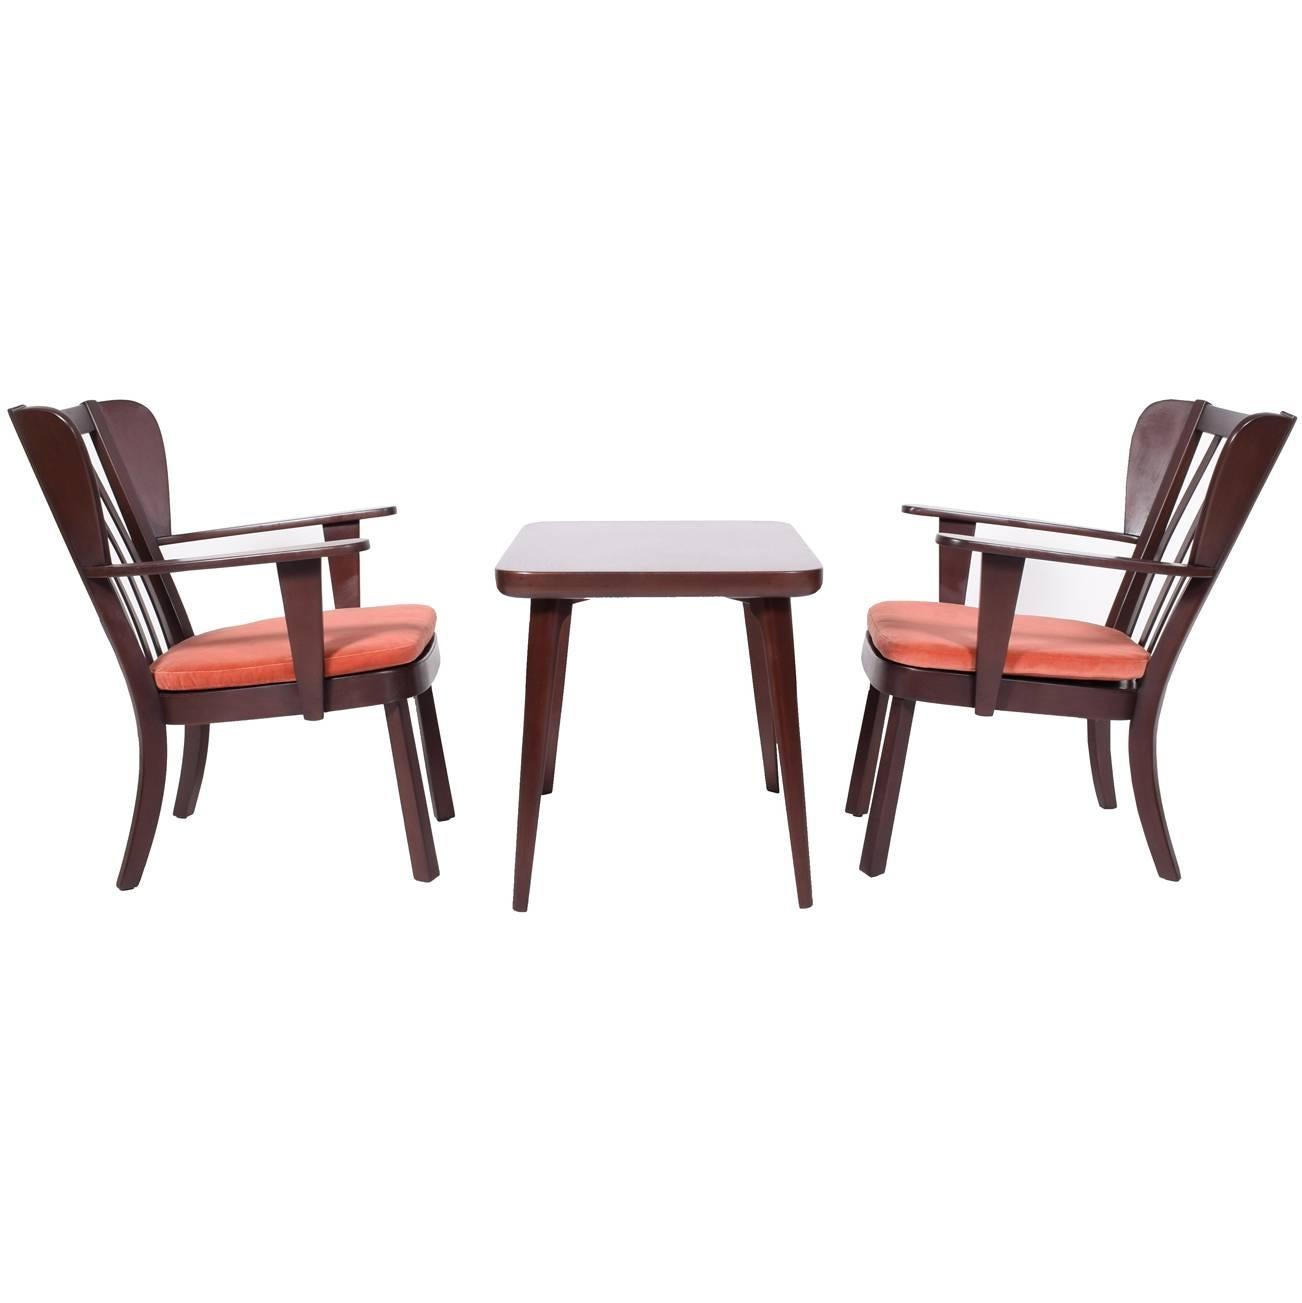 Pair of Canada Series Chairs and Table by Christian Hansen for Fritz Hansen